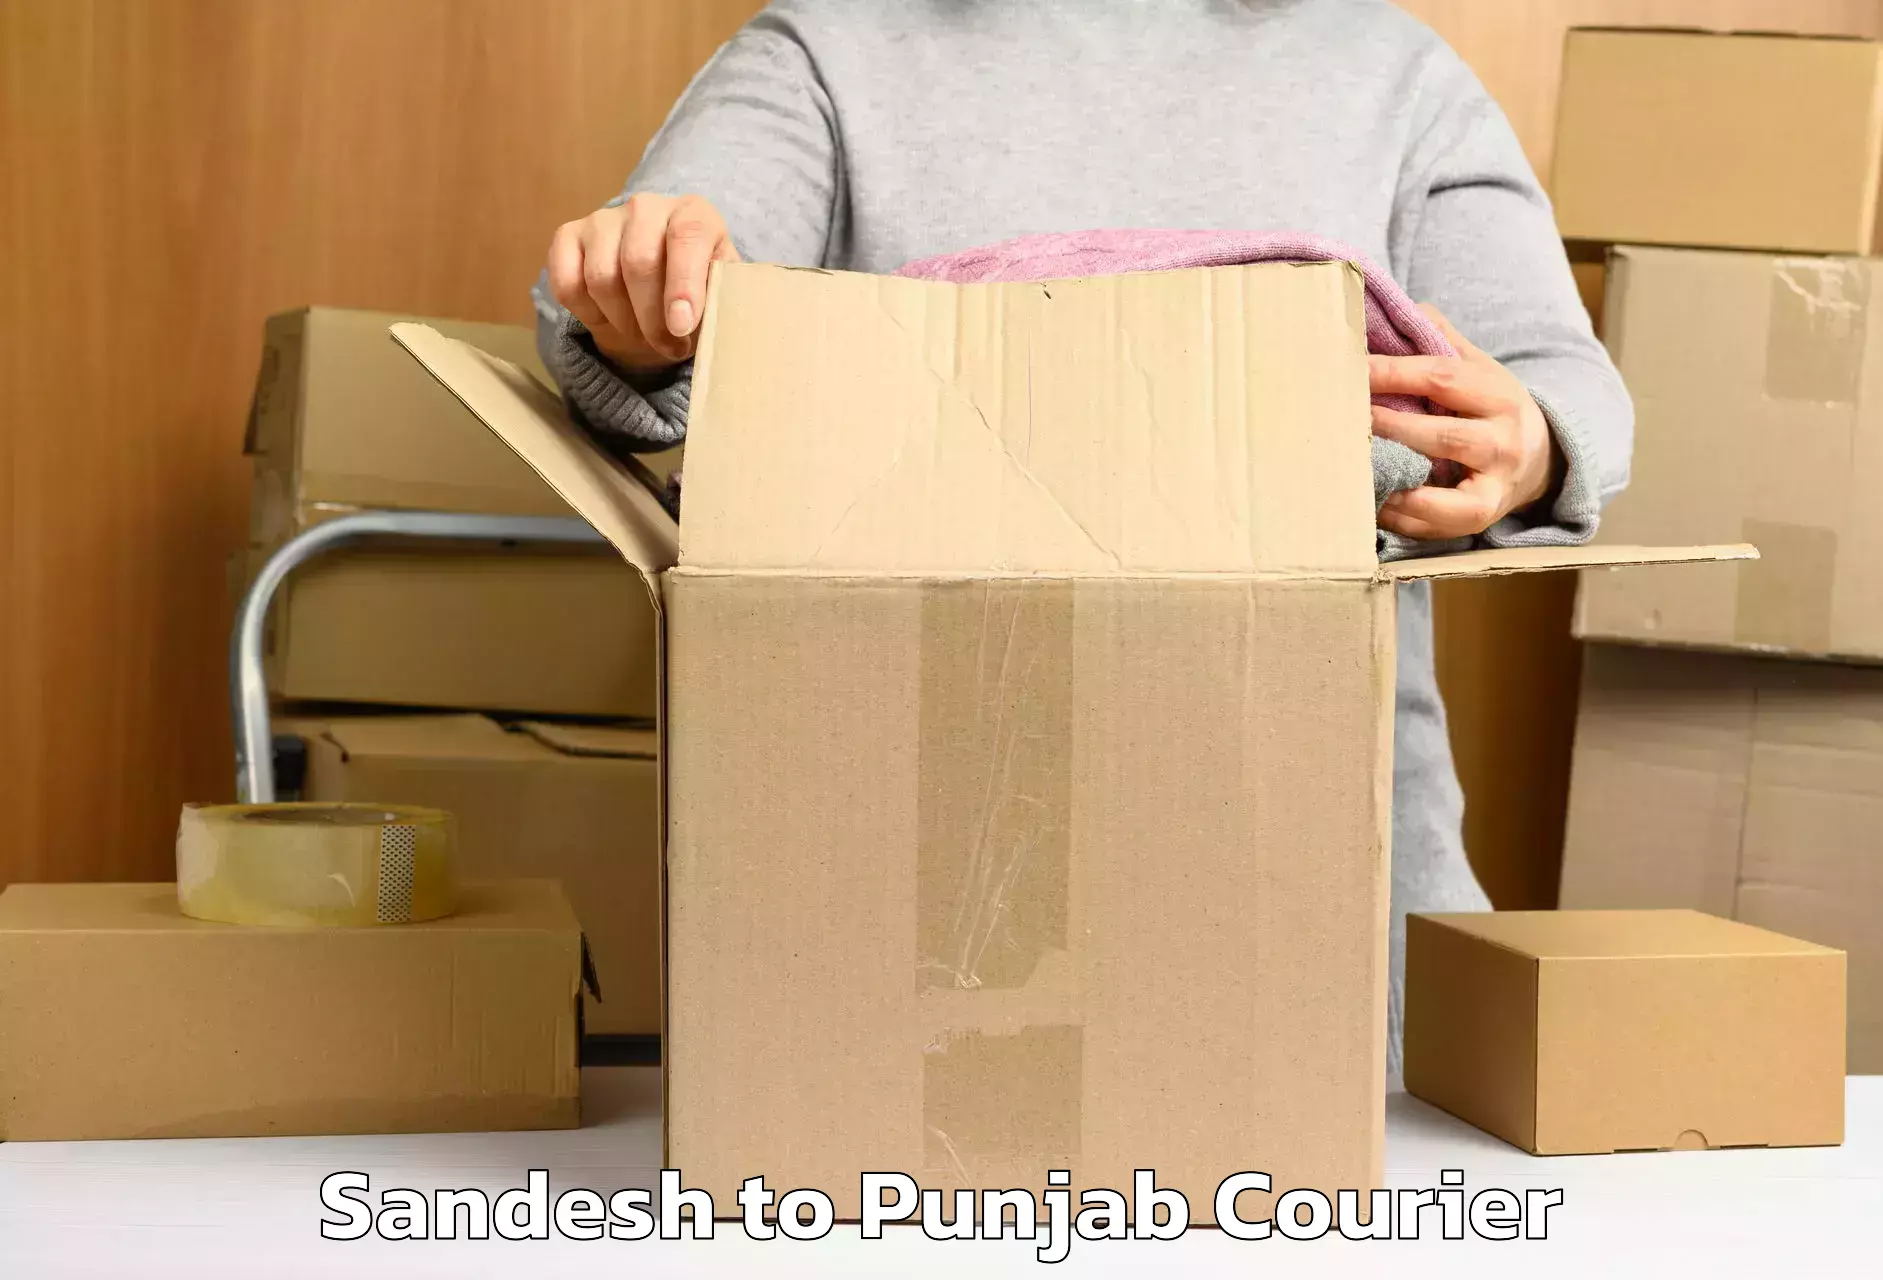 Personal luggage delivery Sandesh to Punjab